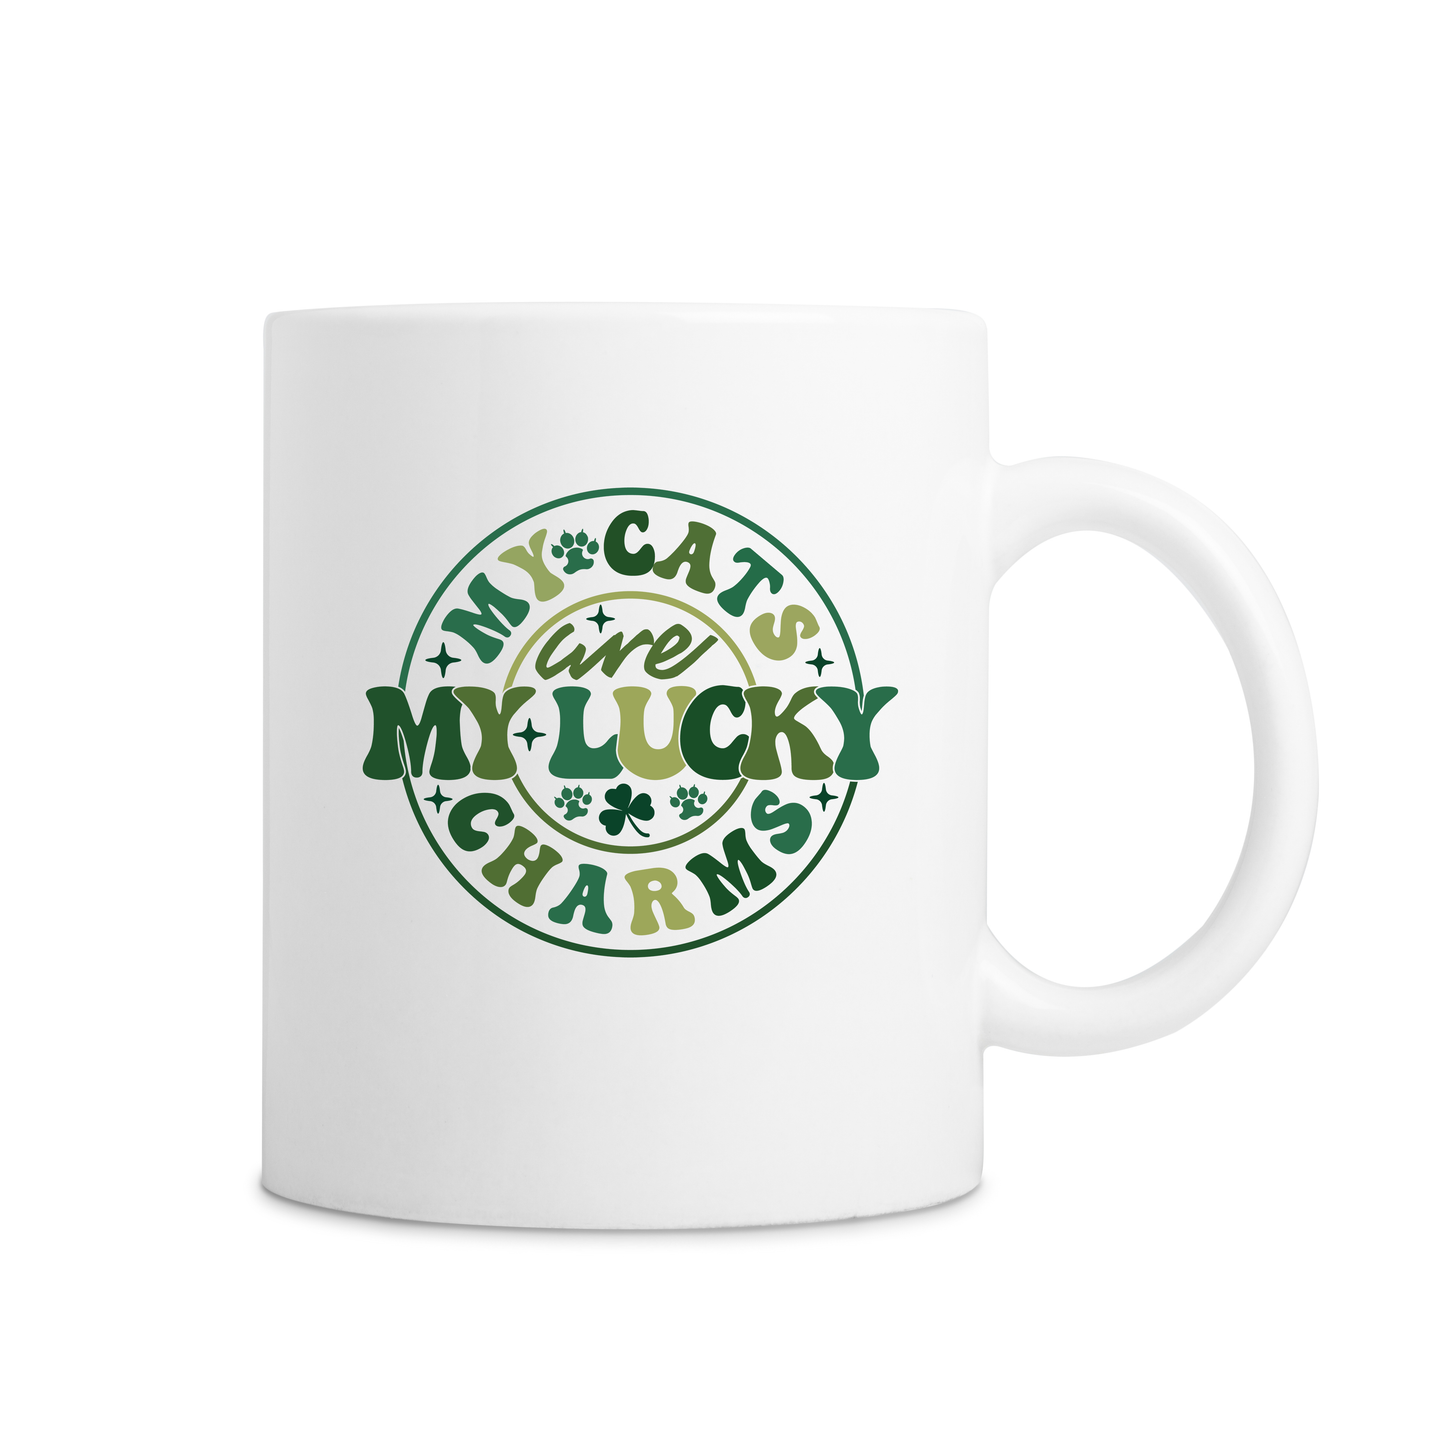 My Cats Are My Lucky Charms Mug - White